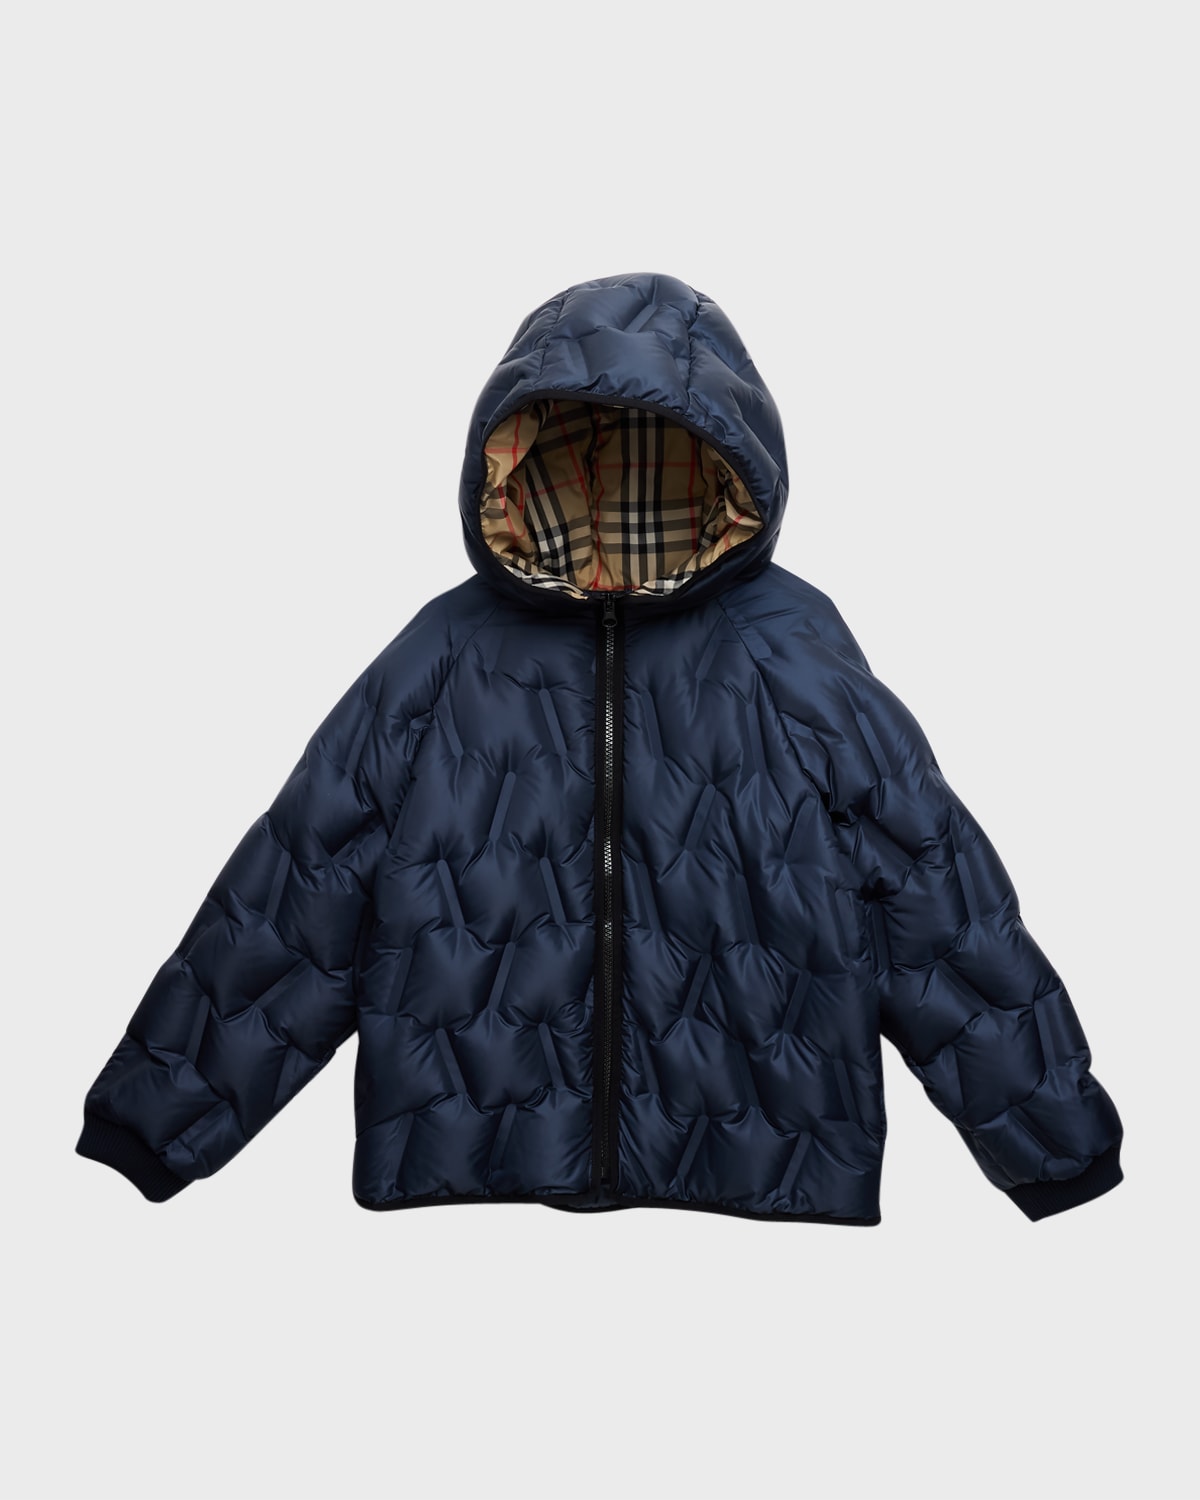 Burberry Kids' Boy's Noah Check-lined Tufted Puffer Jacket In Navy Black